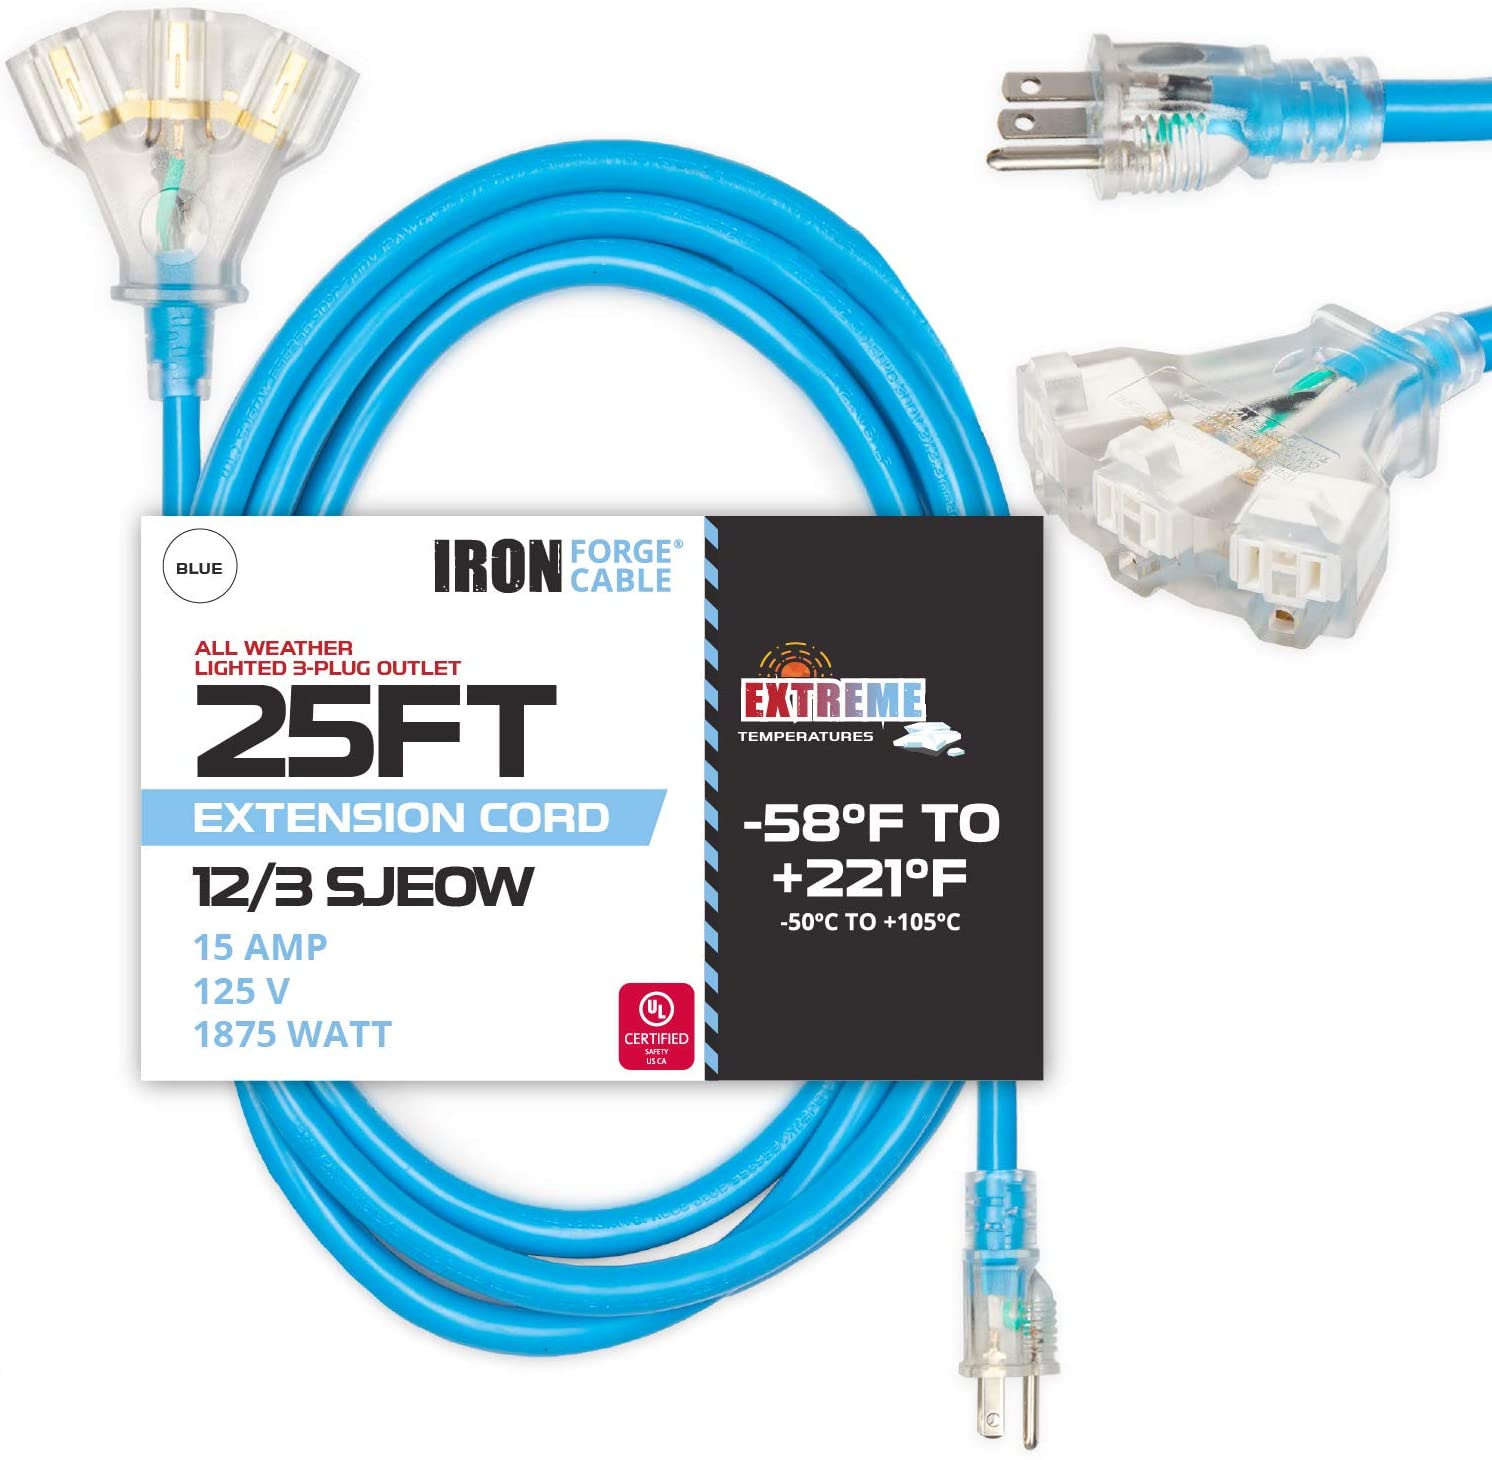  Iron Forge Cable 220/240 Volt Extension Cord, 10 Ft